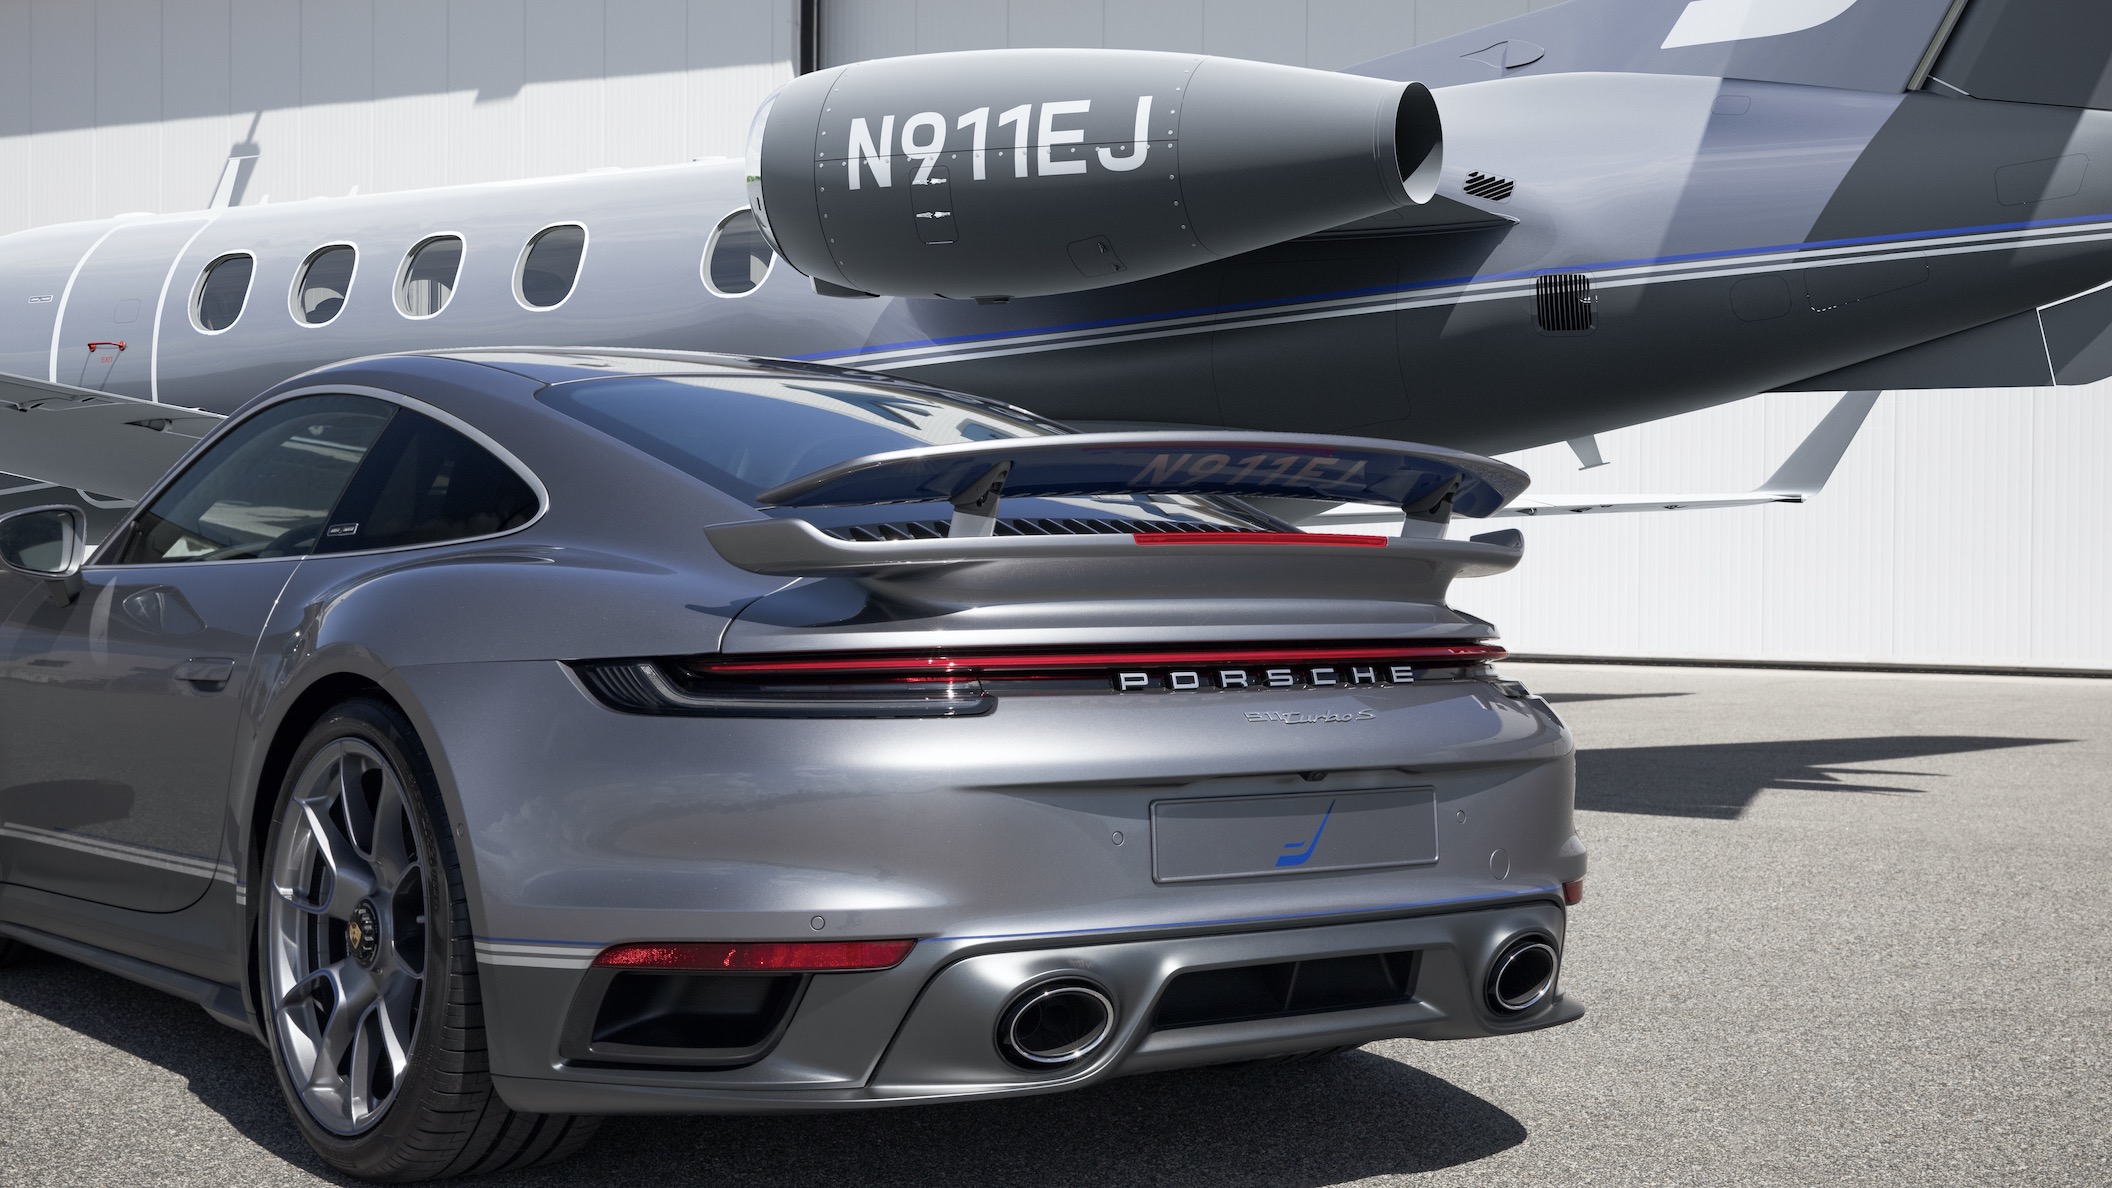 Porsche 911 Turbo S and Embraer Jet